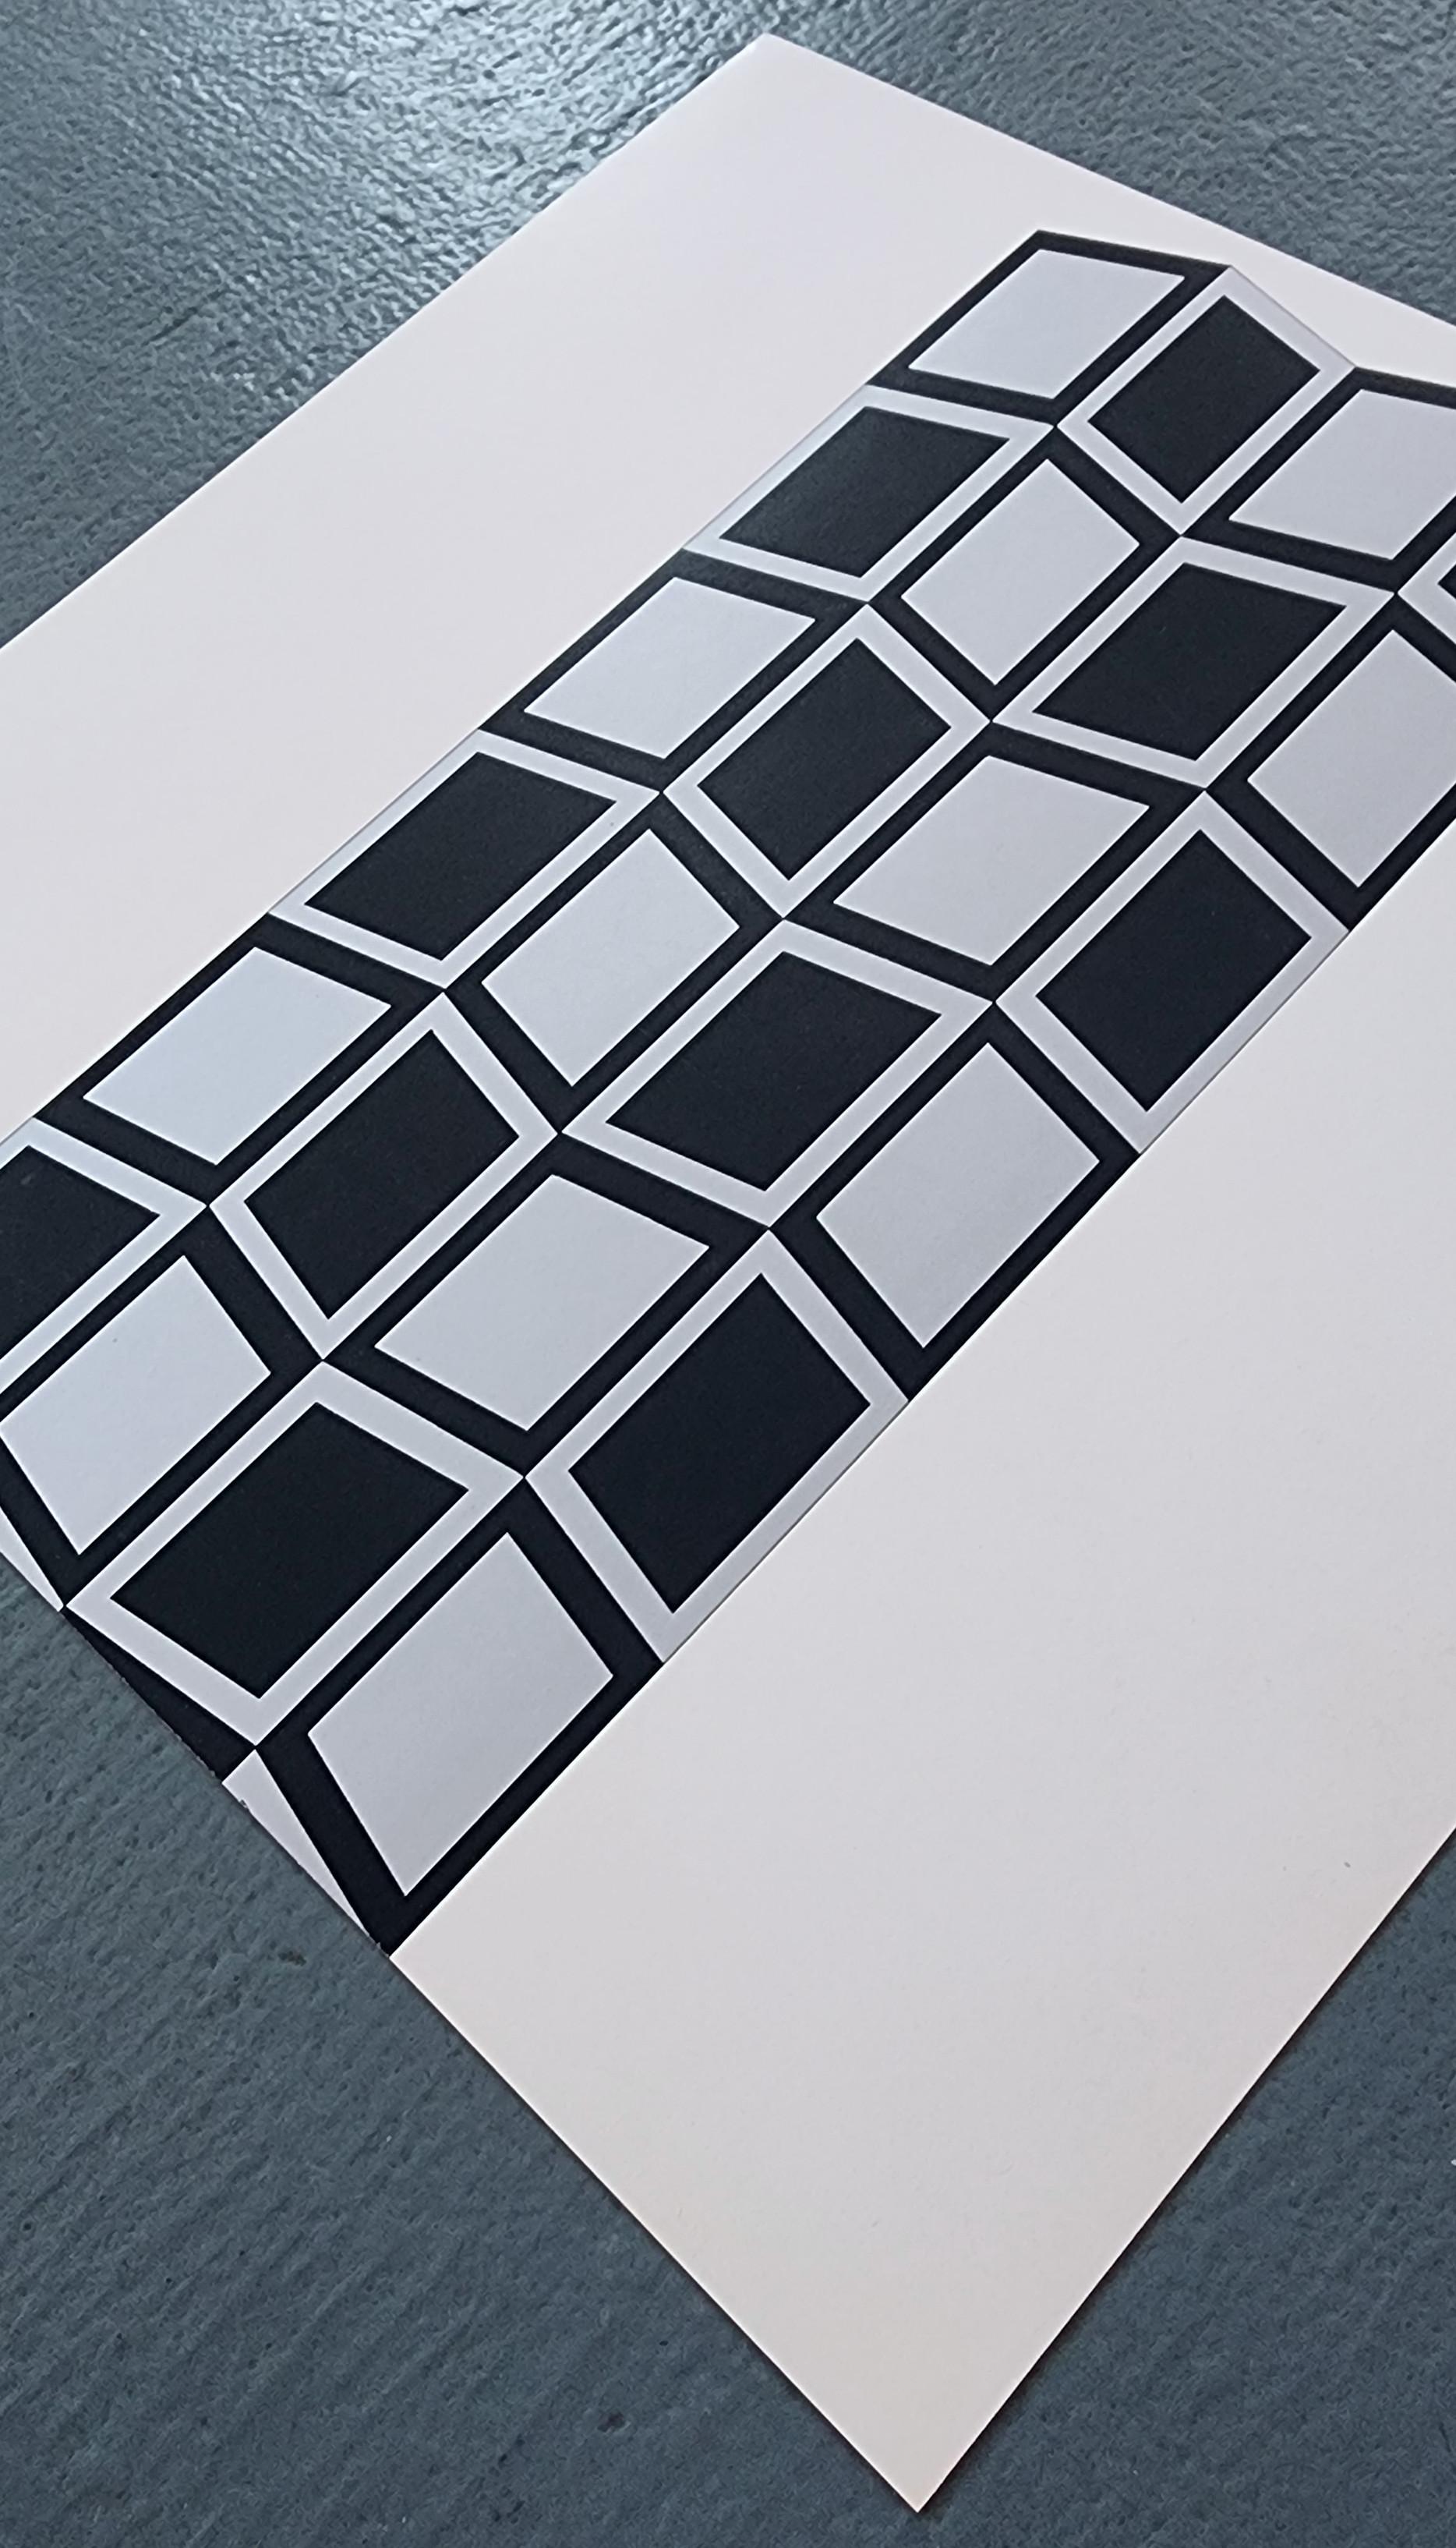 Victor Vasarely
Saeule HK (Detail), 1967
Silkscreen on thick glazed paper (after a painting from 1964)
Image Size: 10.4 x 4.7 in.
Sheet size: 10.6 x 10.6 in.
Unsigned as issued
Printer: Domberger, Stuttgart - Germany
Publisher: Kunstverein Stuttgart